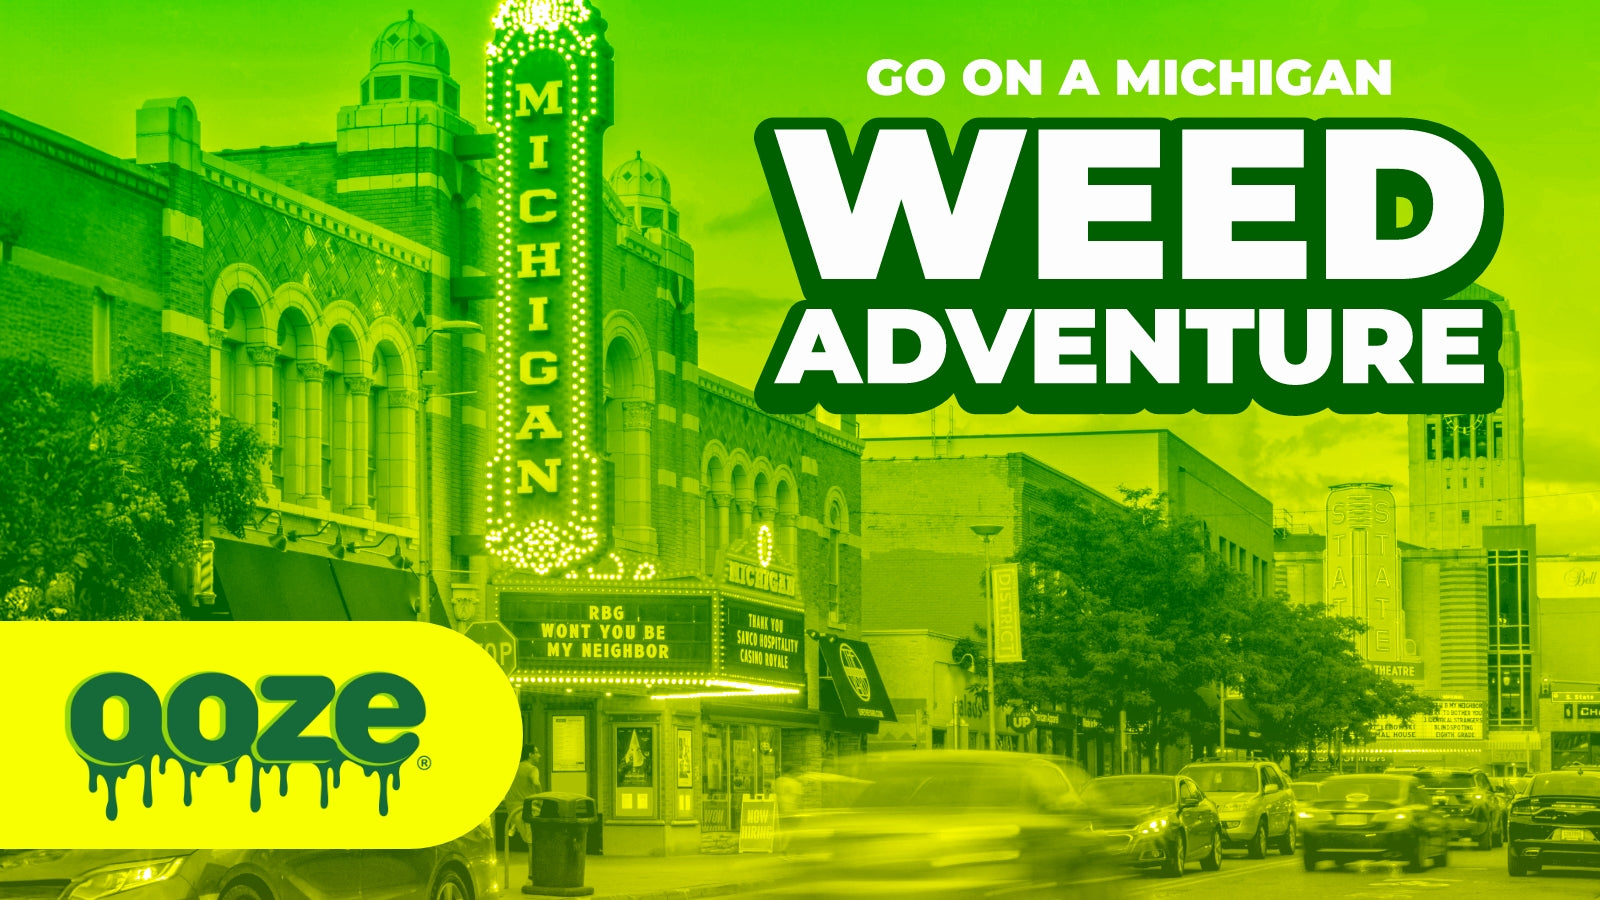 Go On a Michigan Weed Adventure!